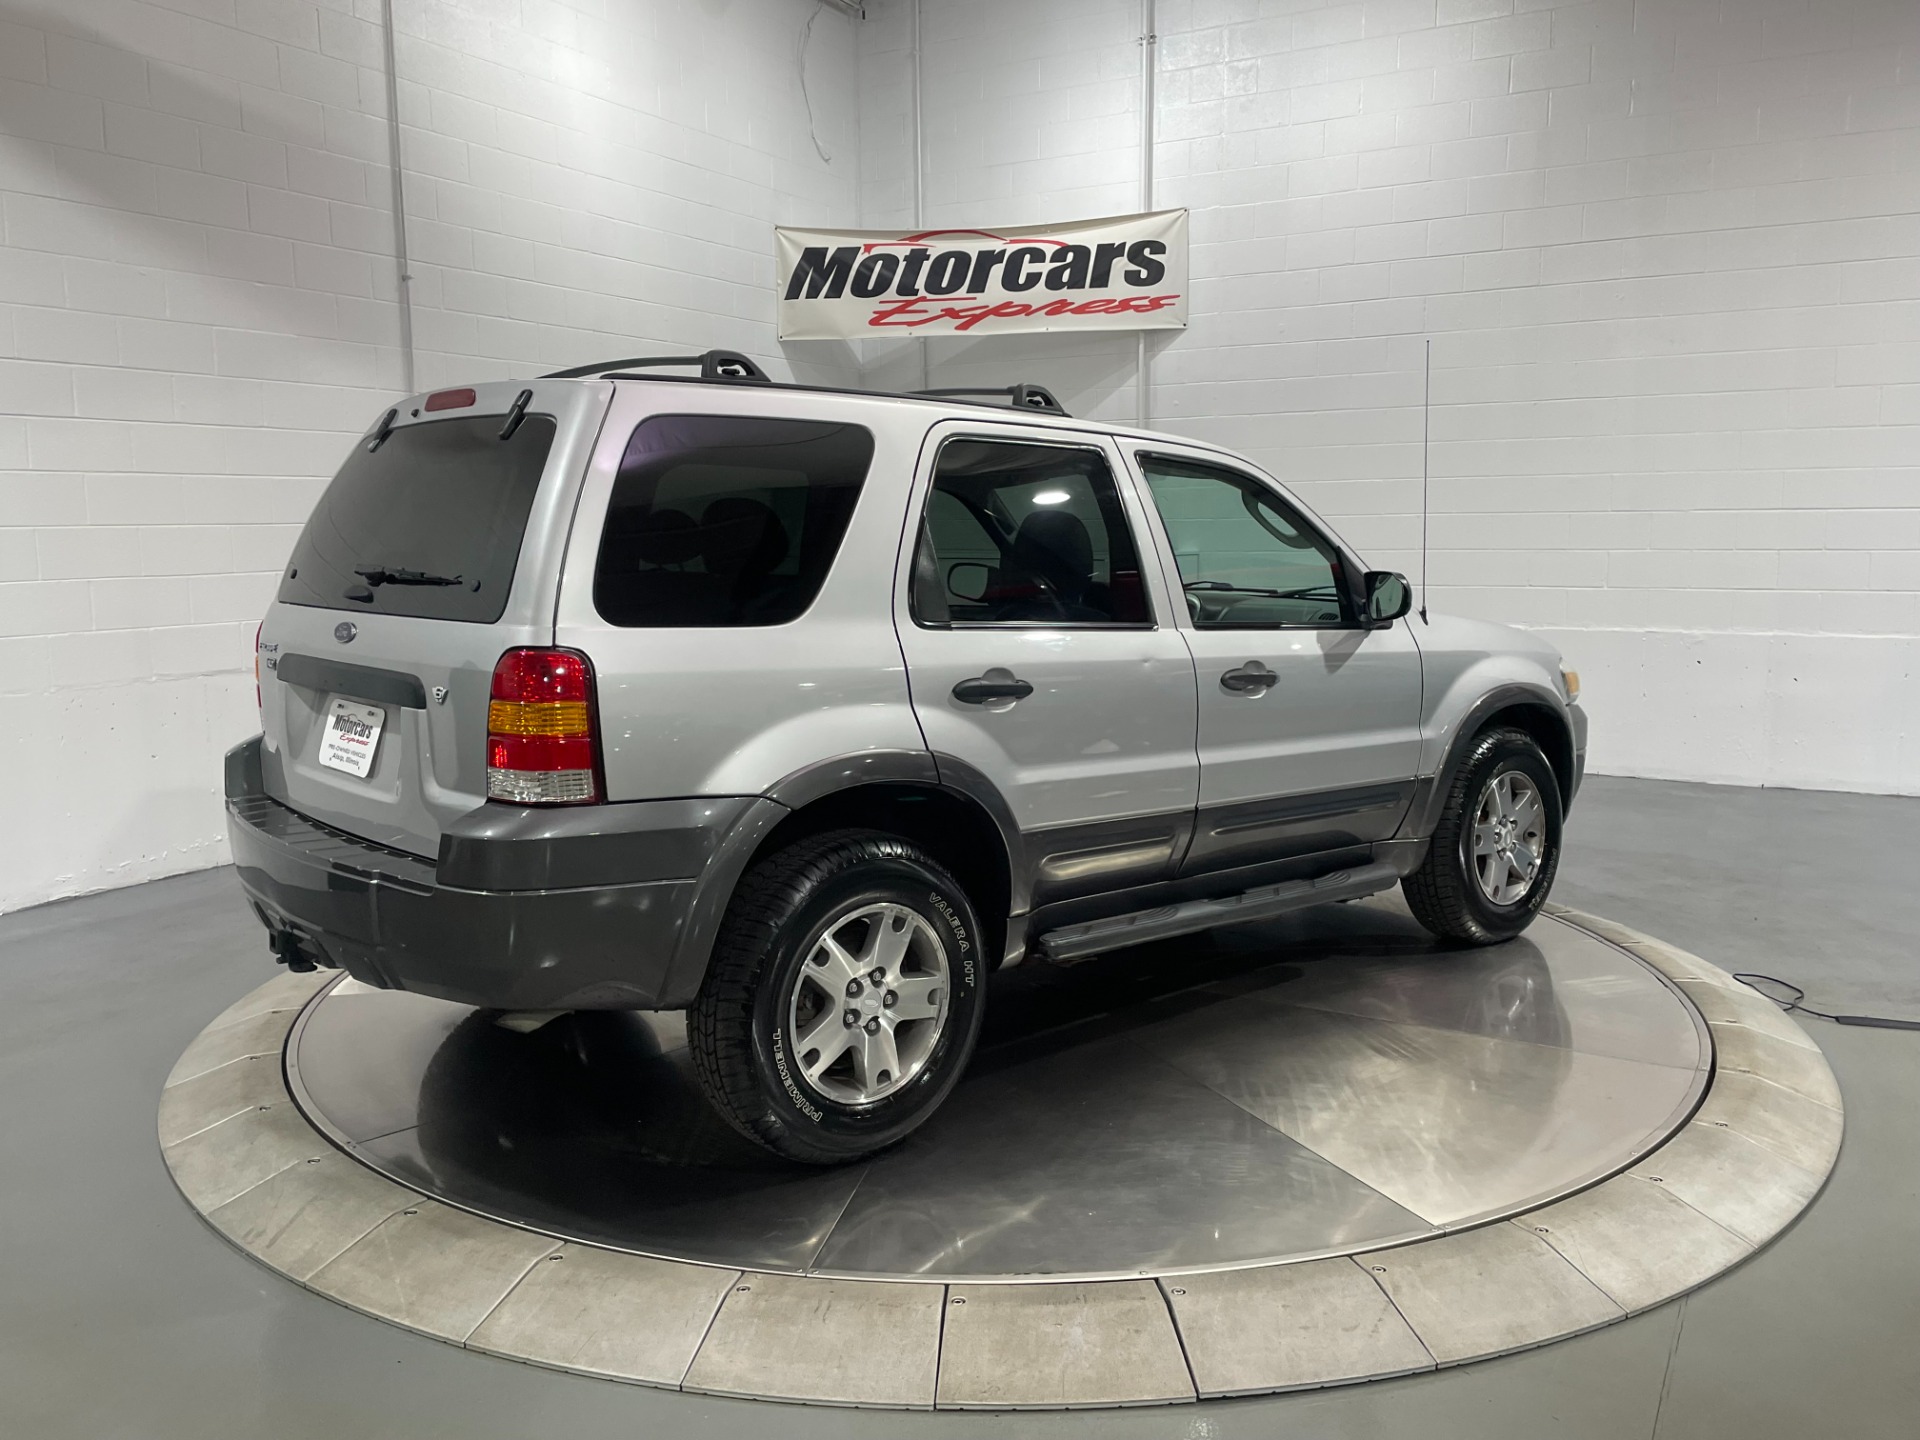 Used-2005-Ford-Escape-XLT-AWD